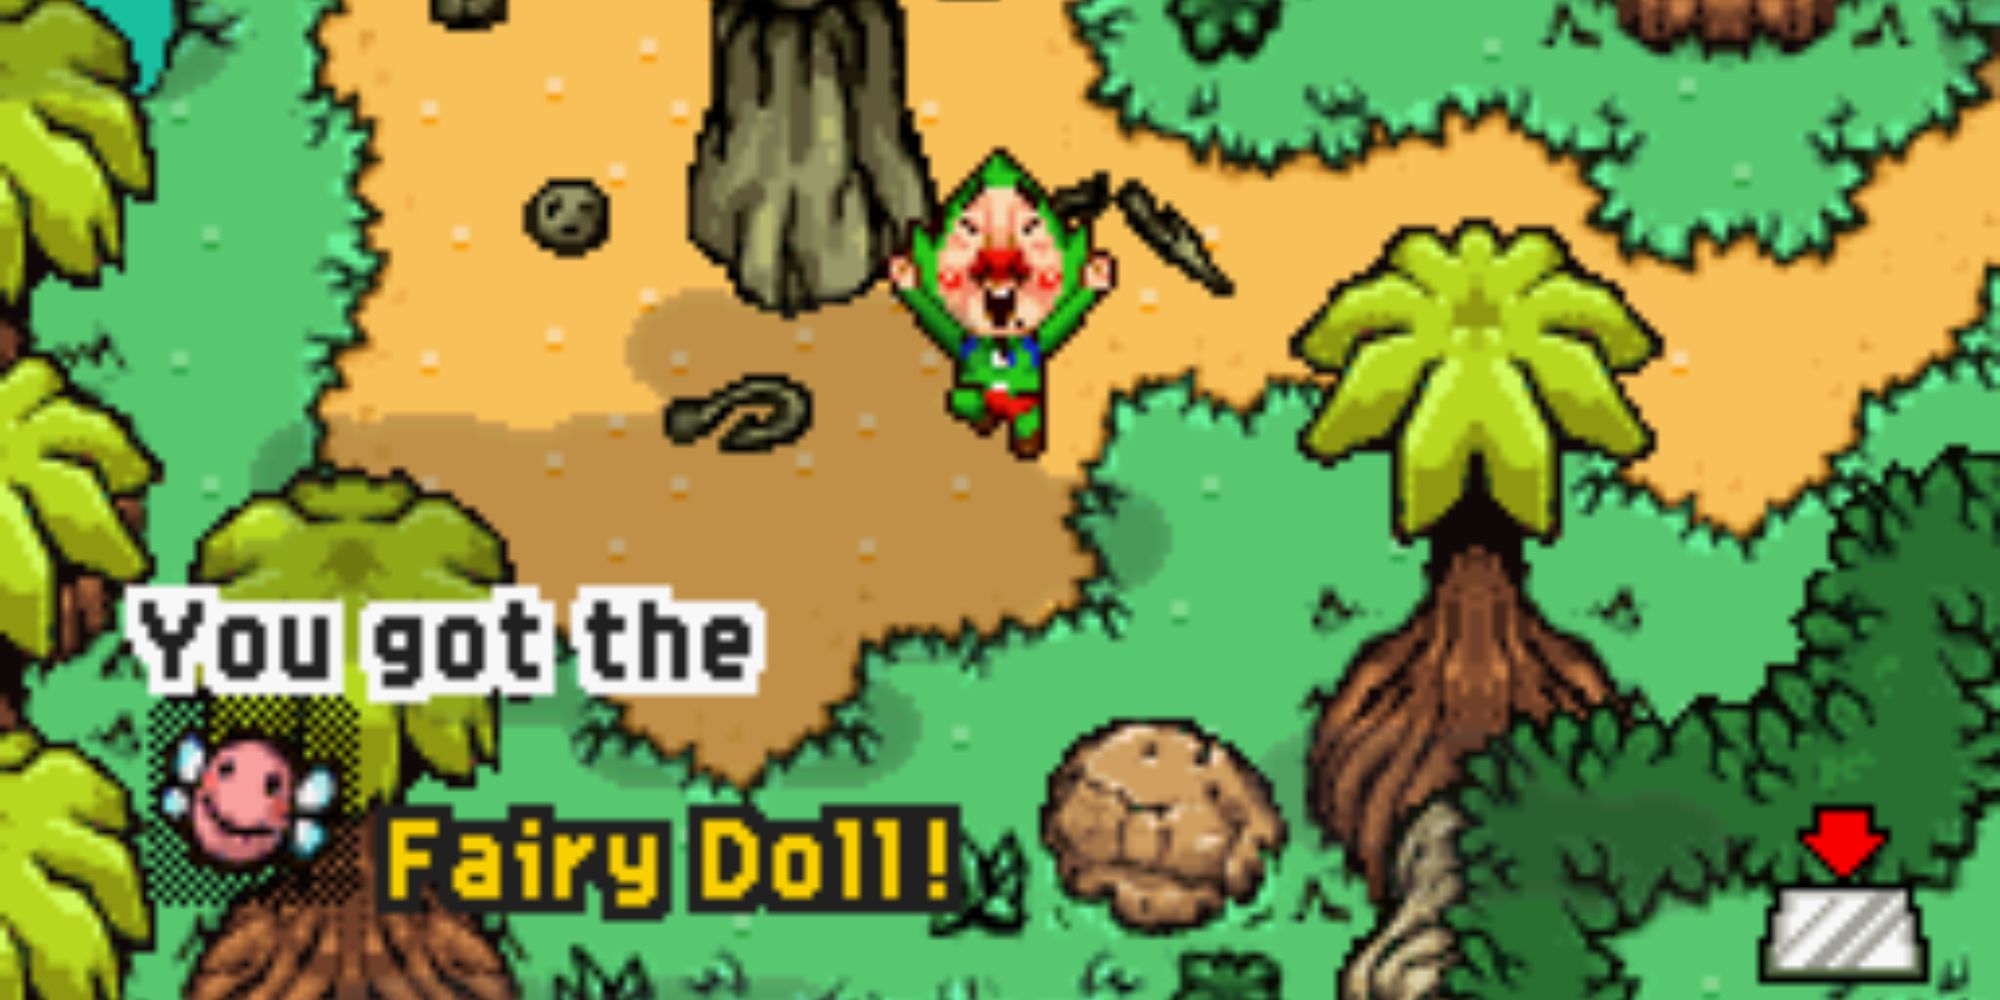 Tingle celebrating after finding a Fairy Doll